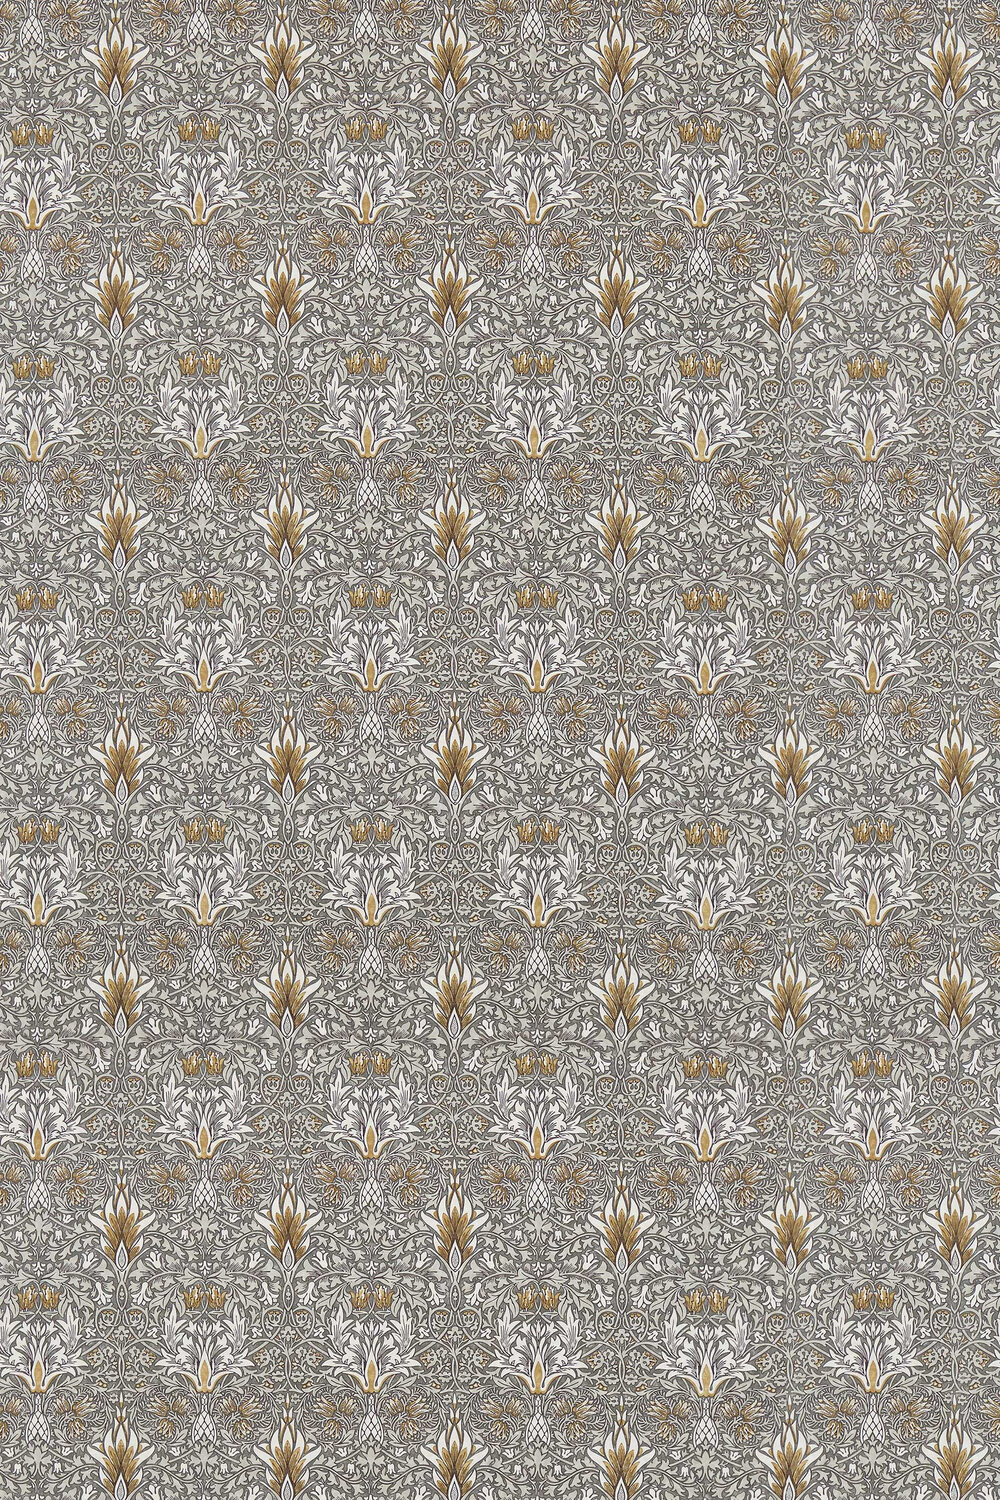 Snakeshead Fabric - Pewter / Gold - by Morris